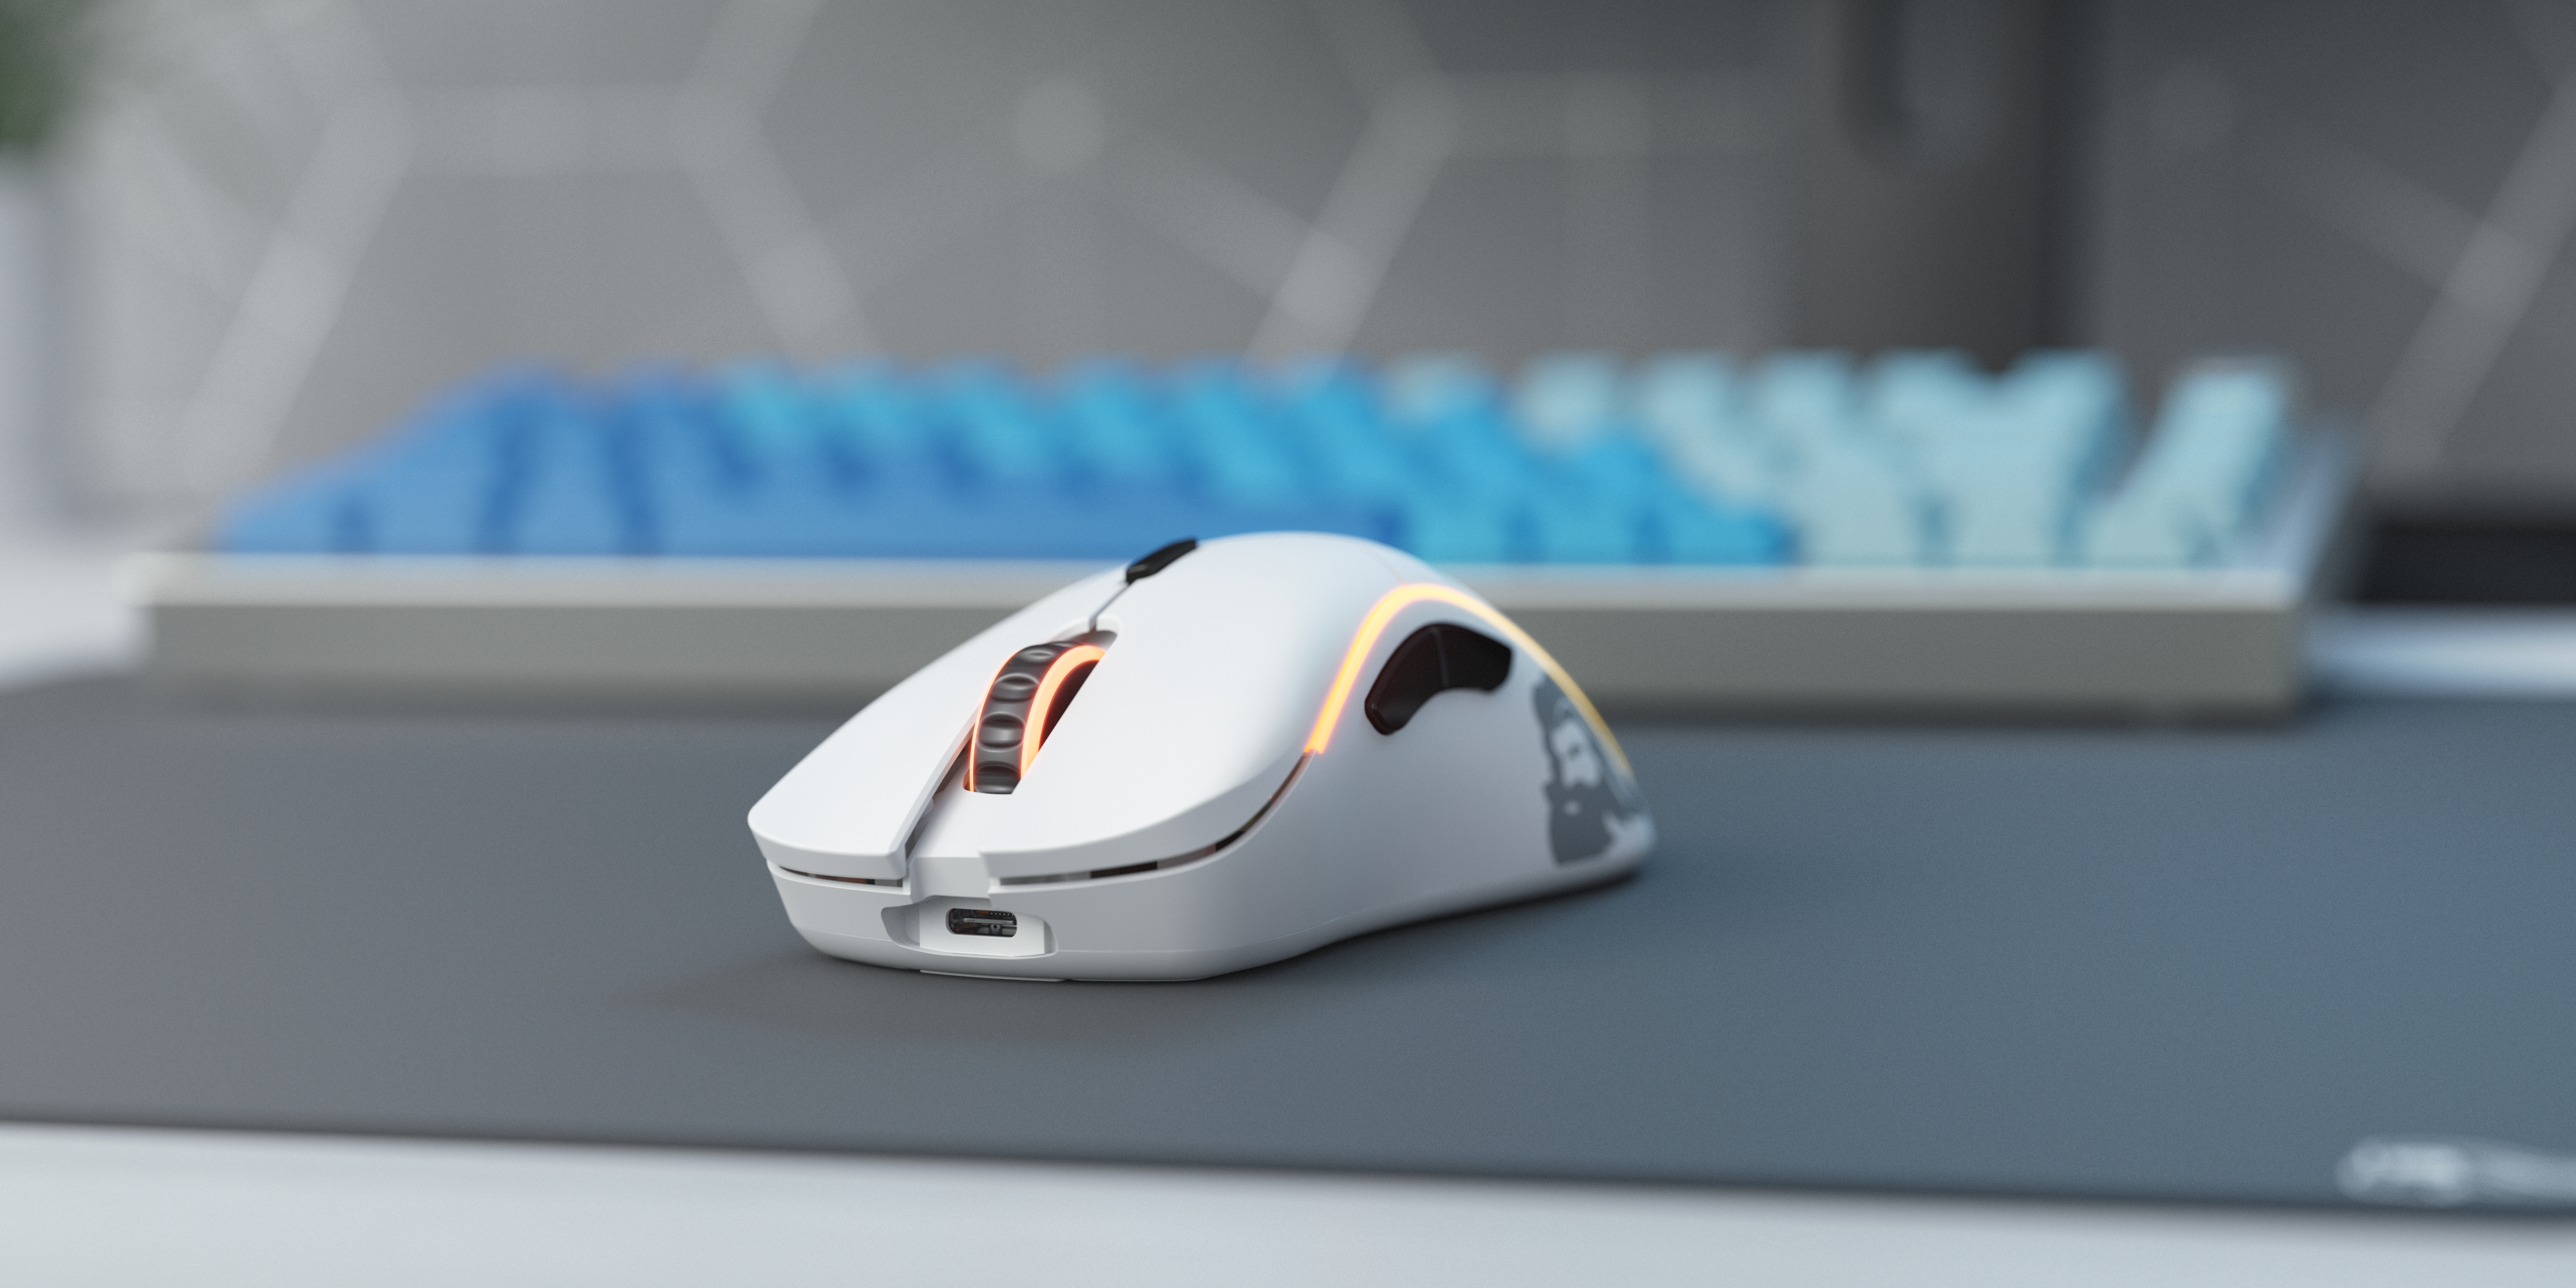 A large marketing image providing additional information about the product Glorious Model D Ergonomic Wireless Gaming Mouse - Matte White - Additional alt info not provided